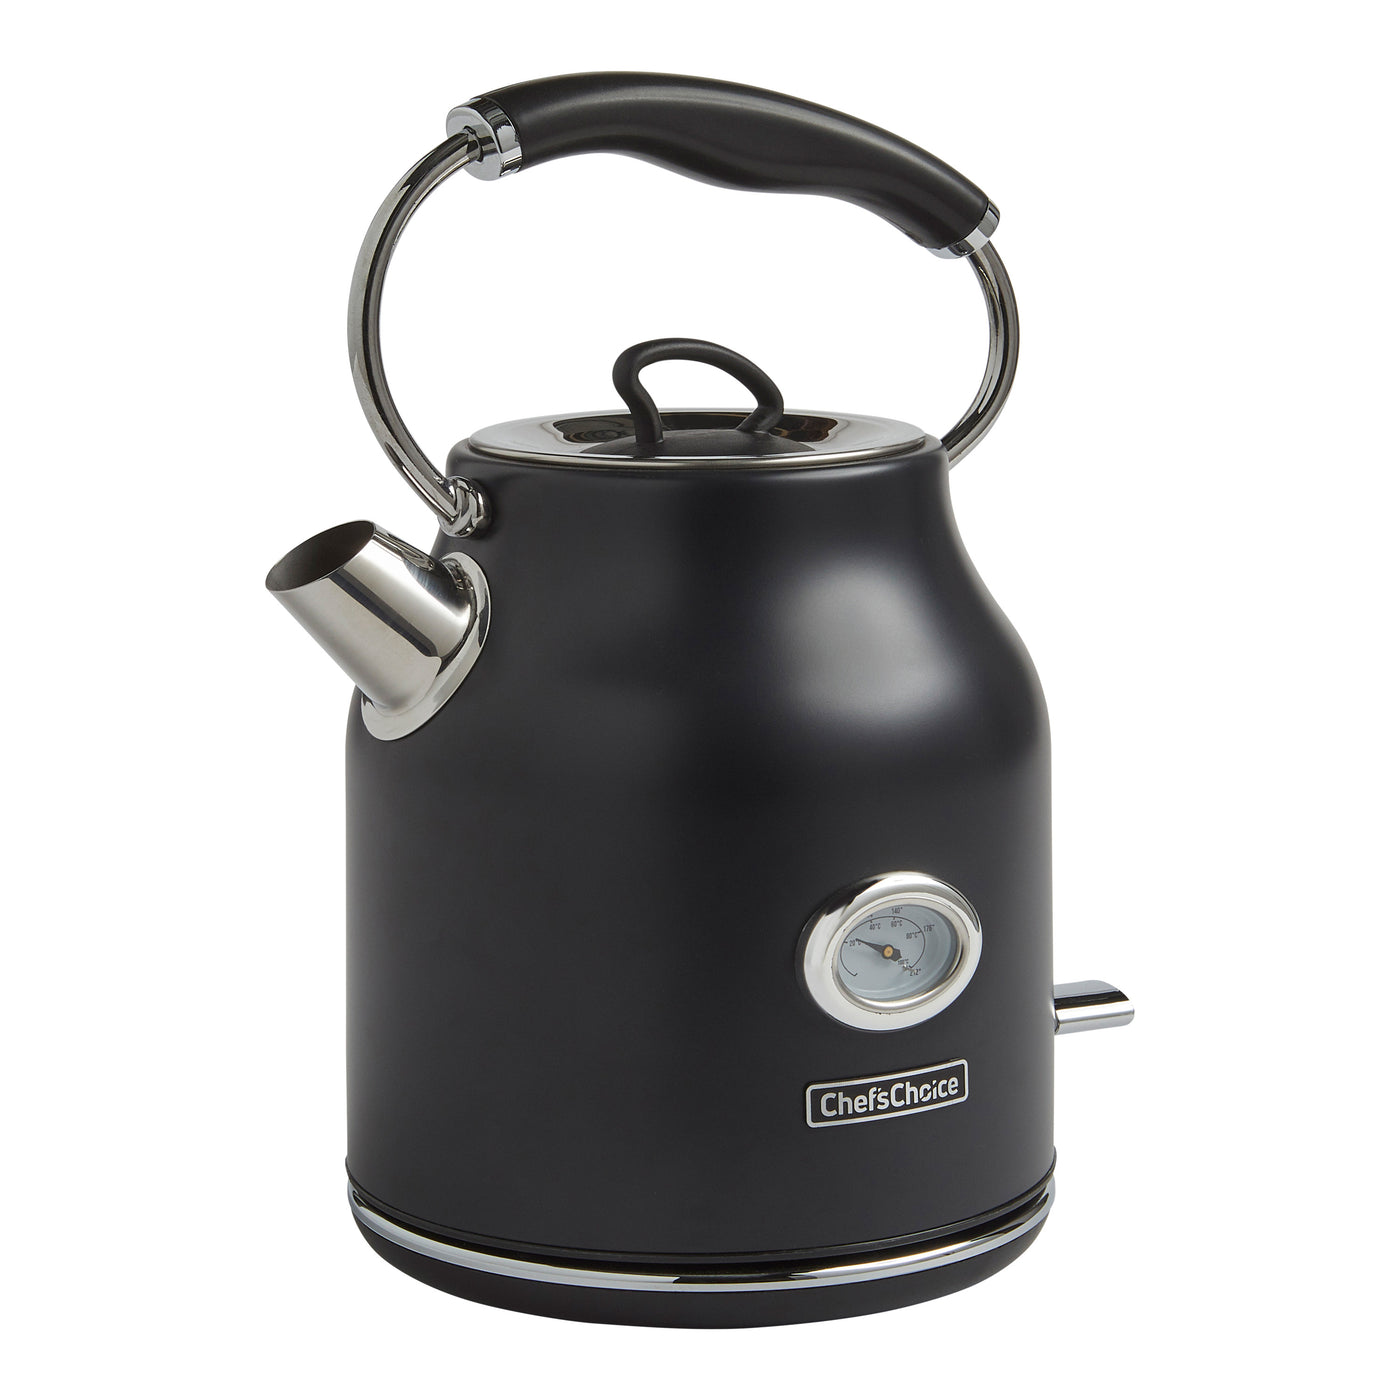 Electric Kettle, Fast Heating, Cord-Free Serving, 1.7 Liter